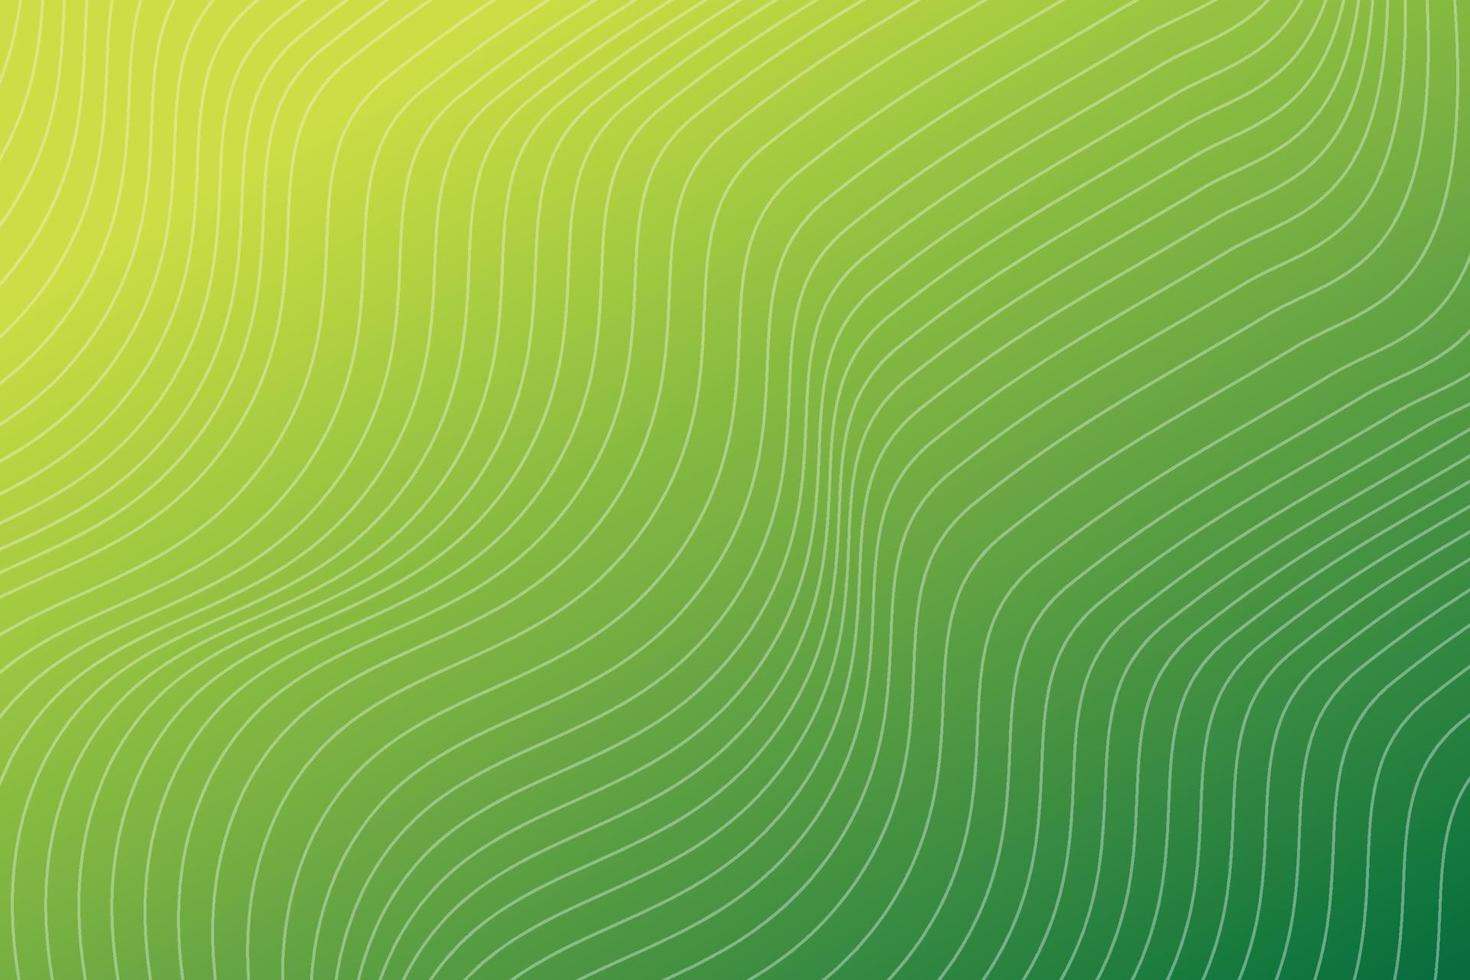 Vector Illustration of the grdient  green and yellow pattern of lines abstract background. EPS10.